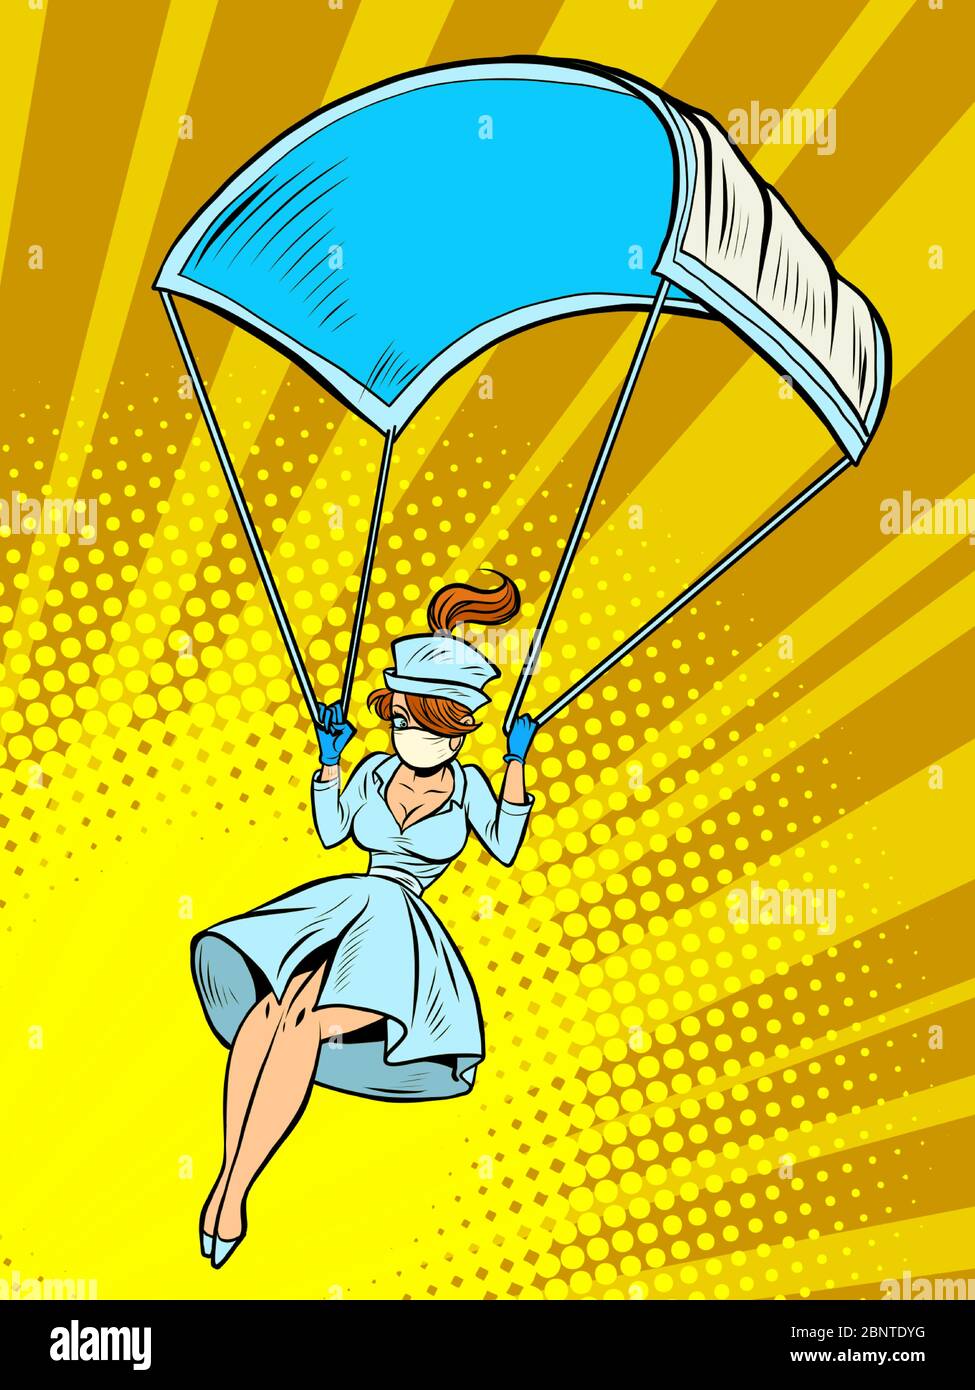 super hero nurse goes down on a parachute like a medical mask Stock Vector